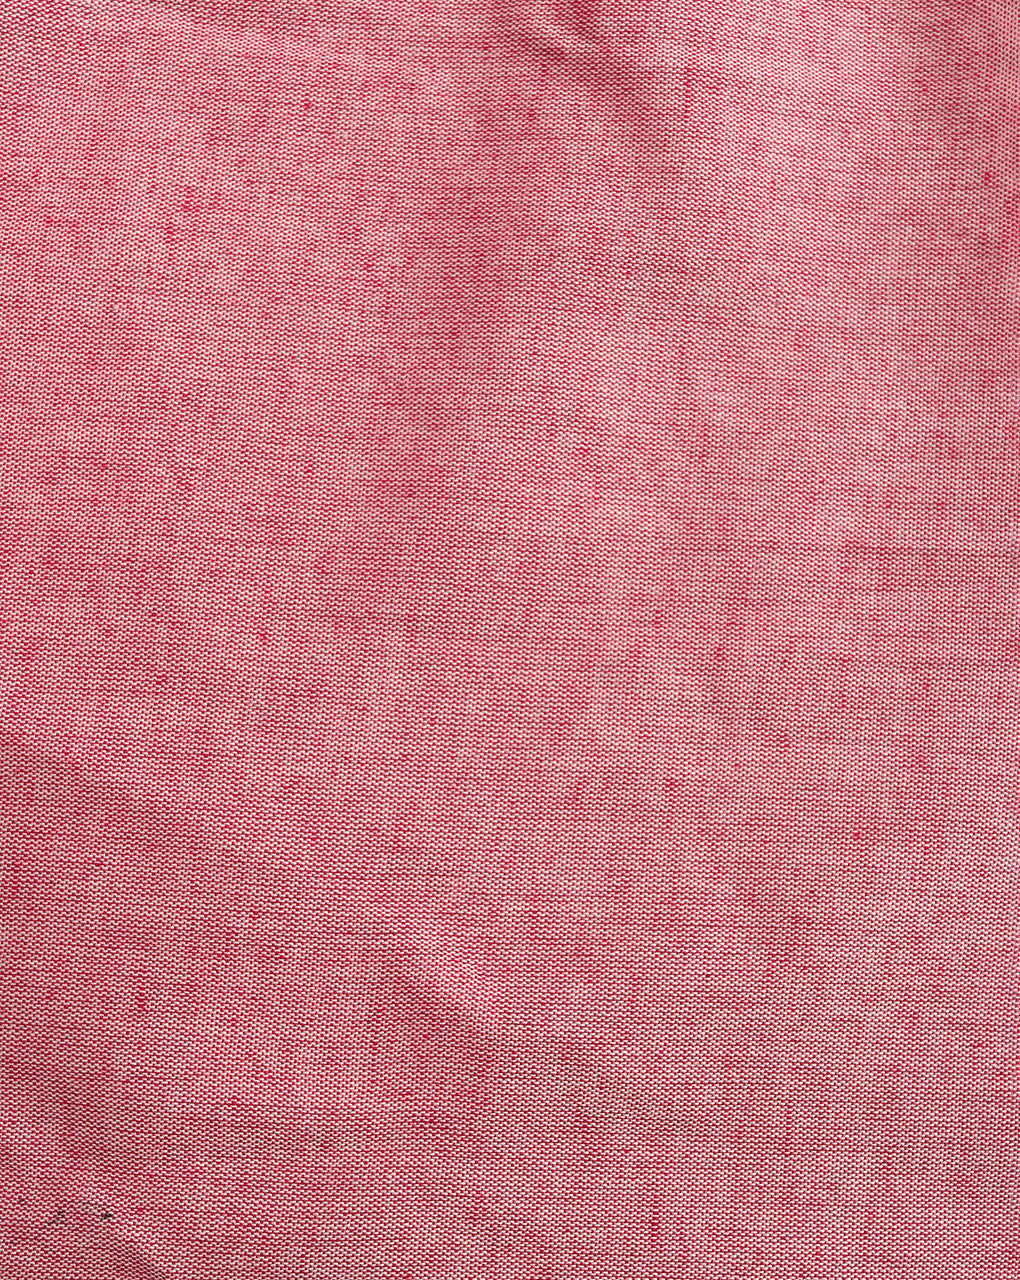 Red Chambray Cotton Fabric